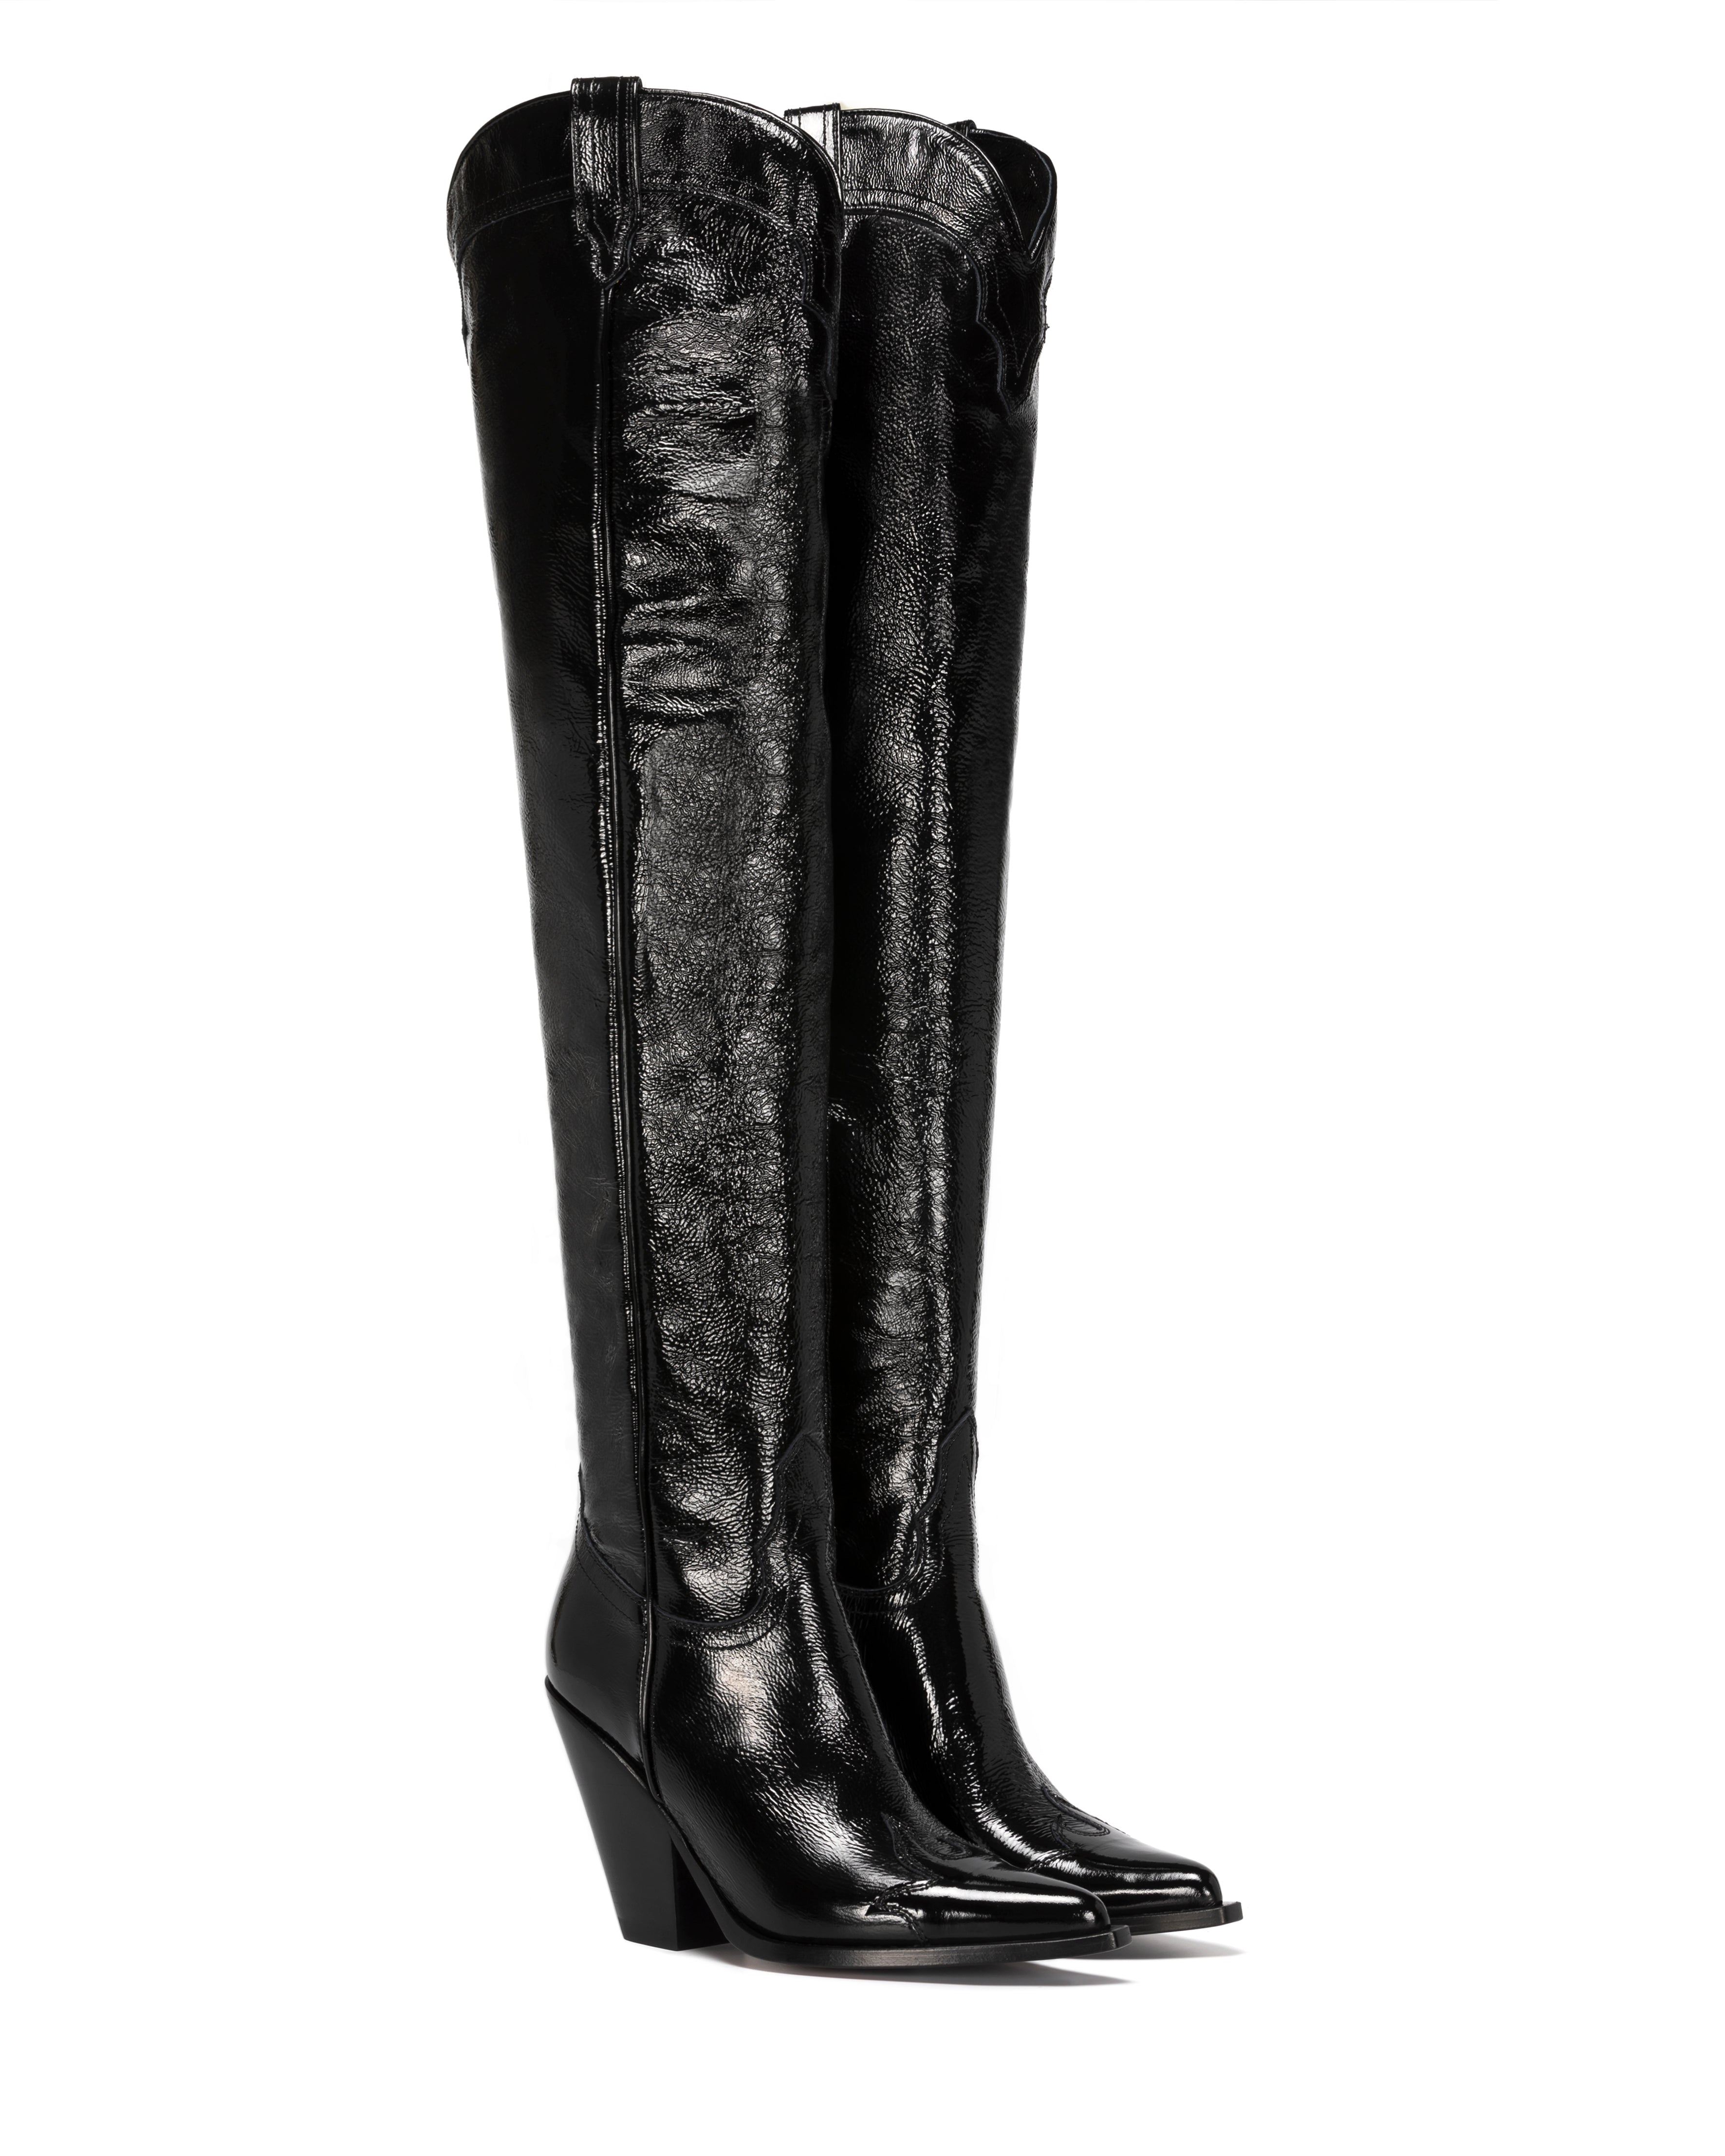 HERMOSA FUEGO Women's Over The Knee Boots in Black Patent